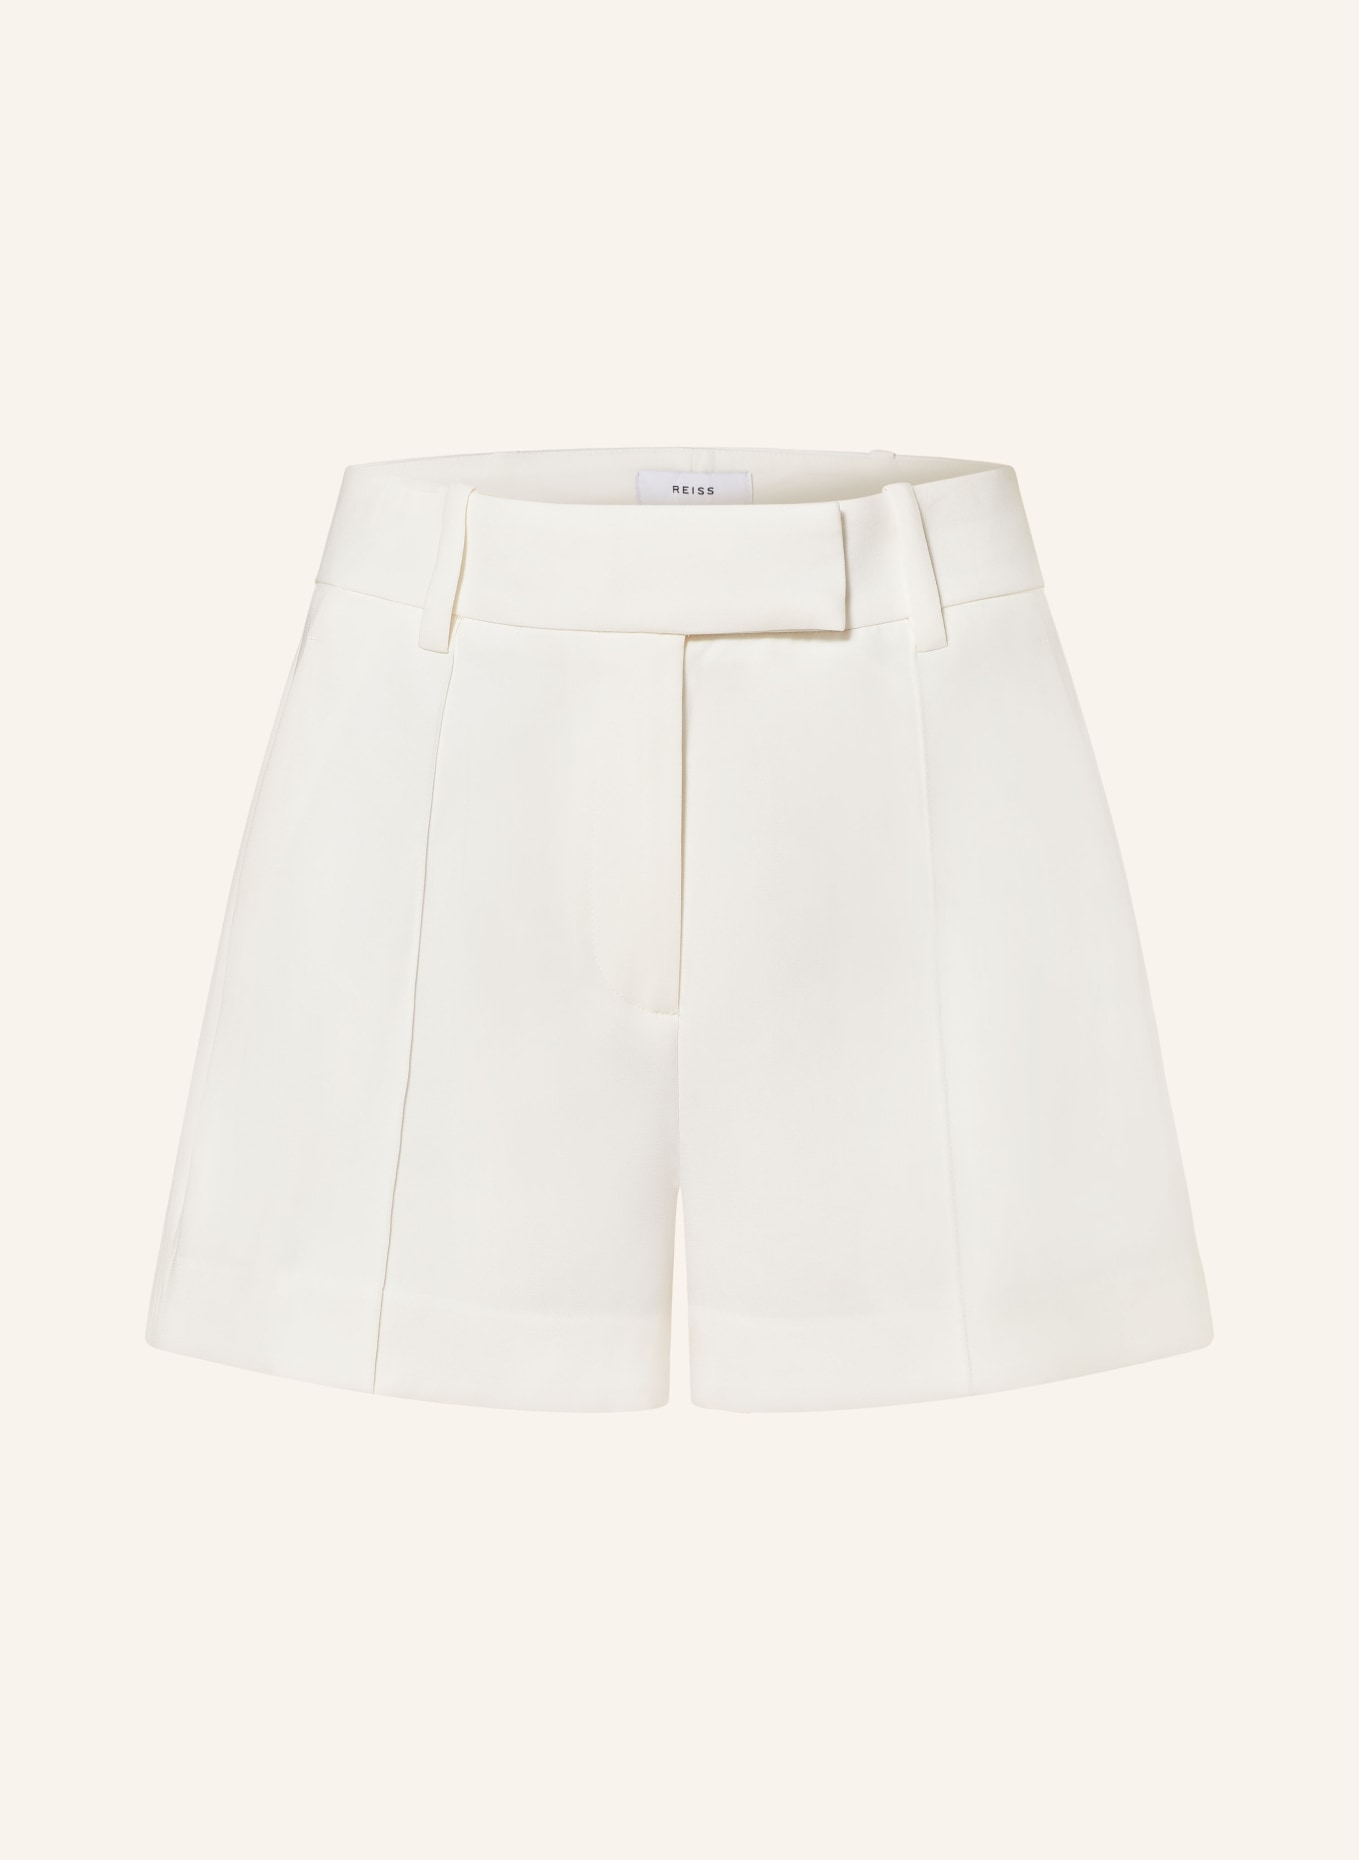 REISS Shorts SIENNA, Color: WHITE (Image 1)